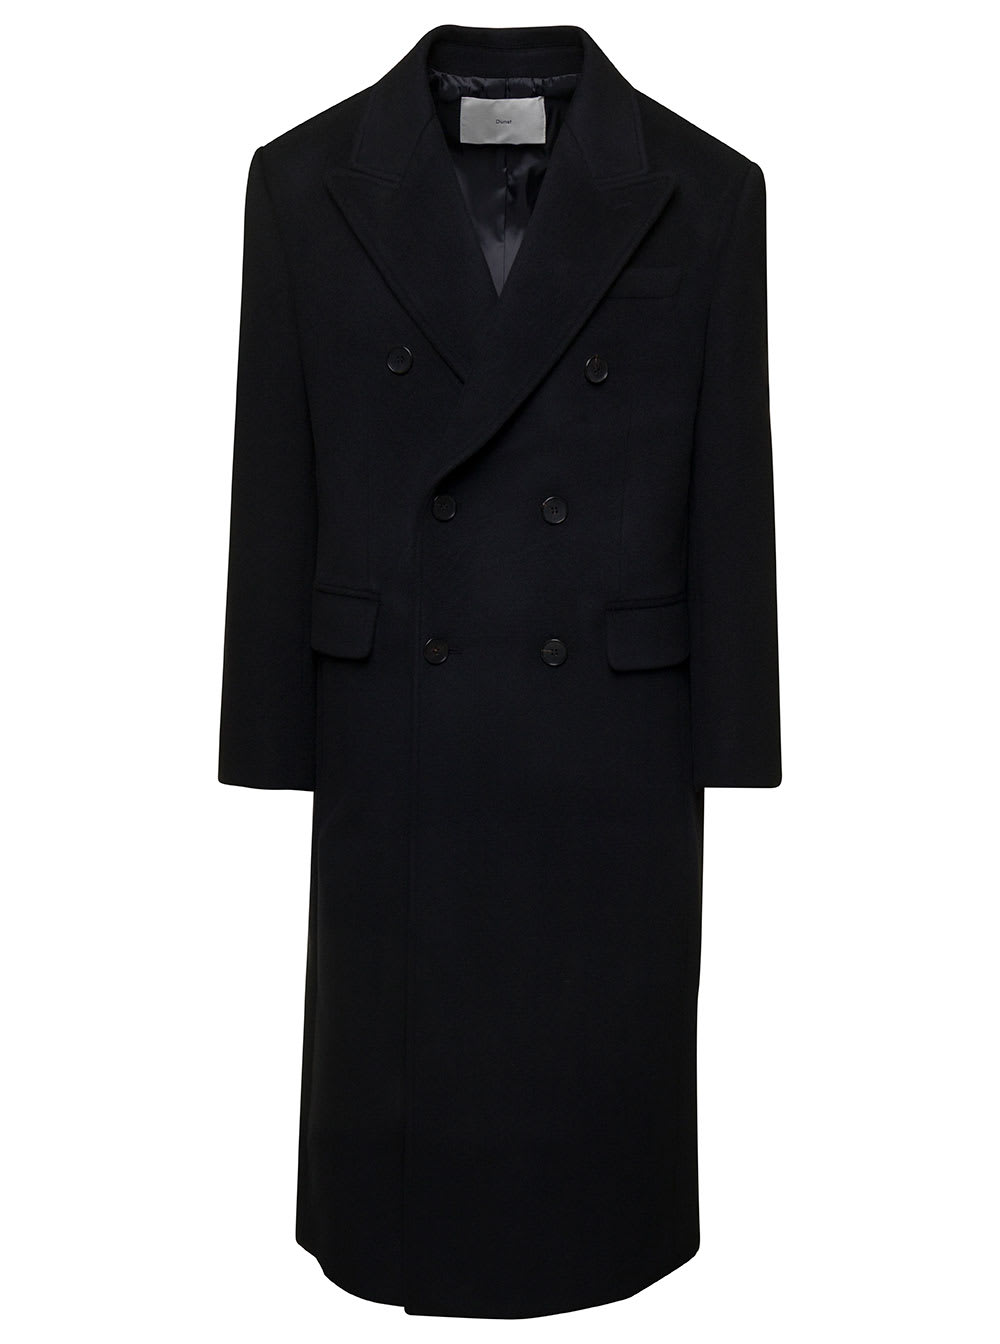 DUNST LONG BLACK TAILORED DOUBLE-BREASTED COAT IN WOOL MAN